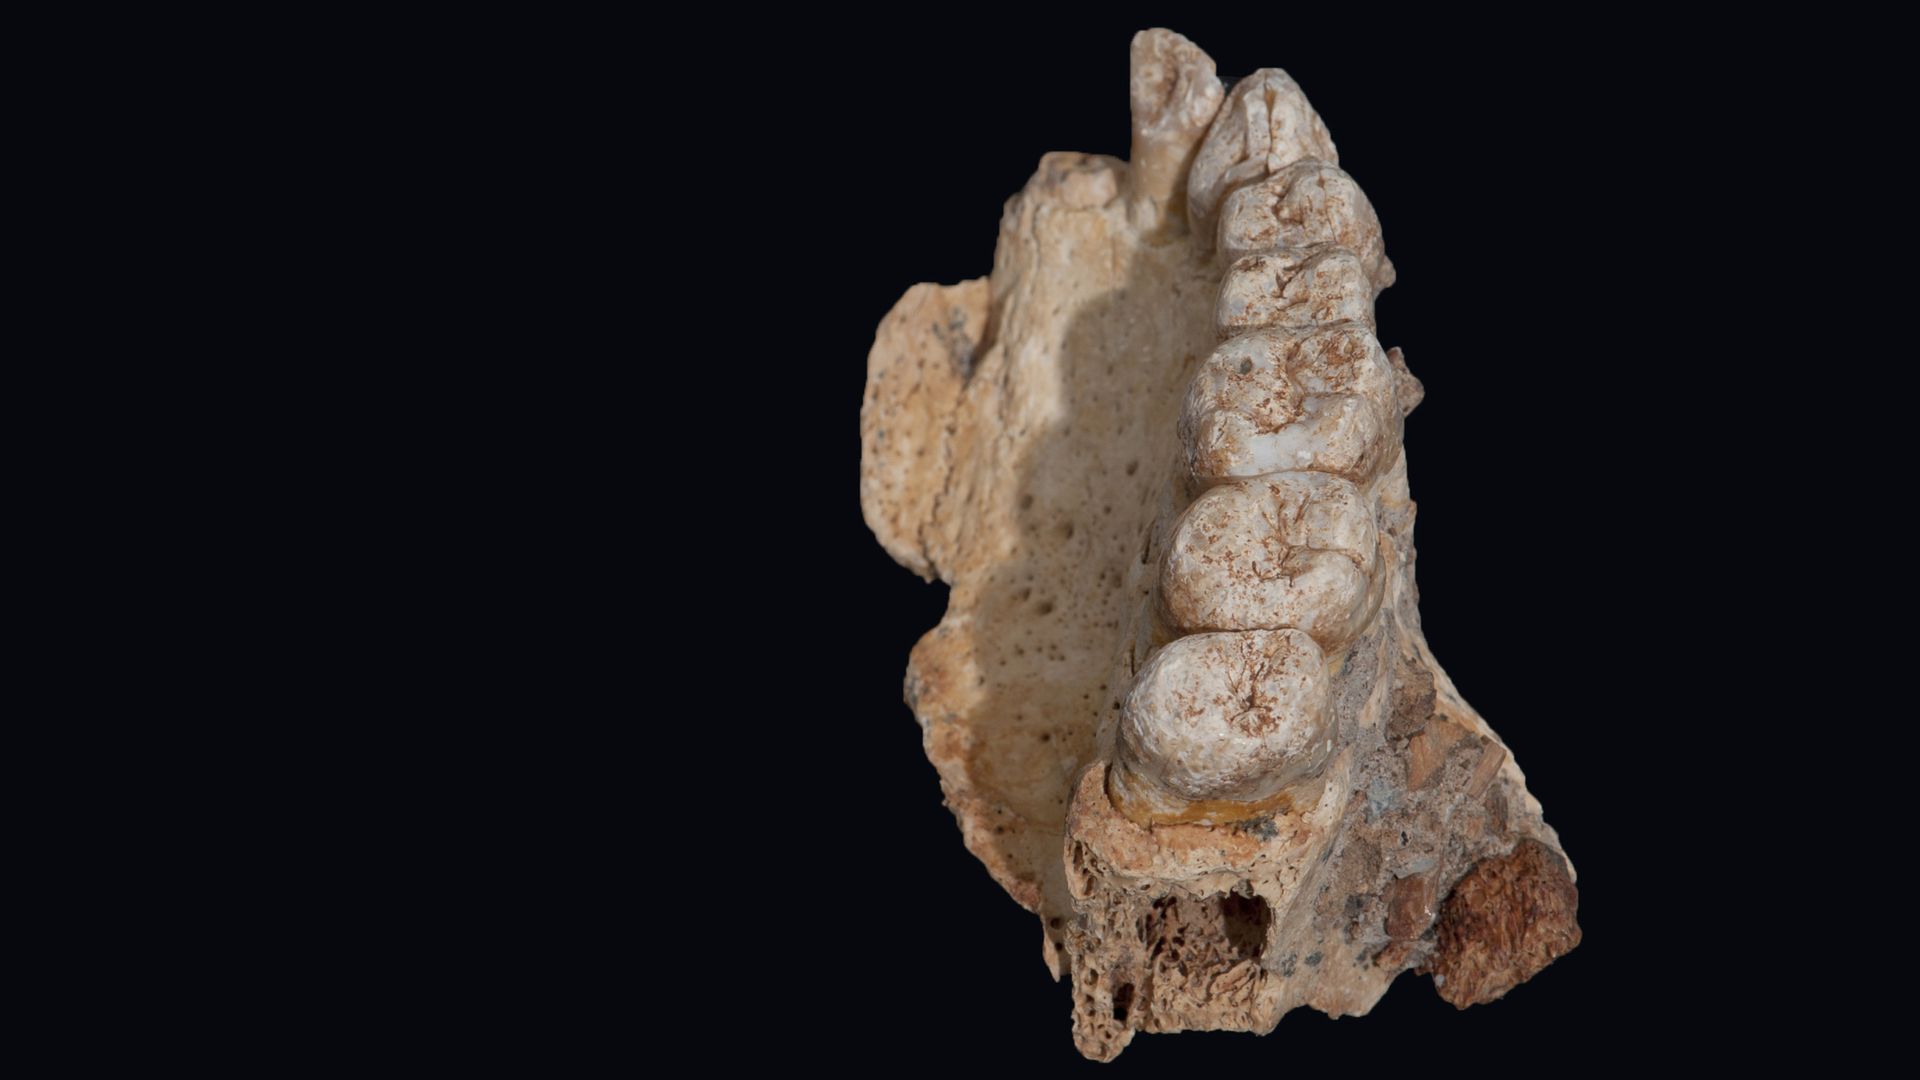 The upper left jaw of an early human, found in Israel